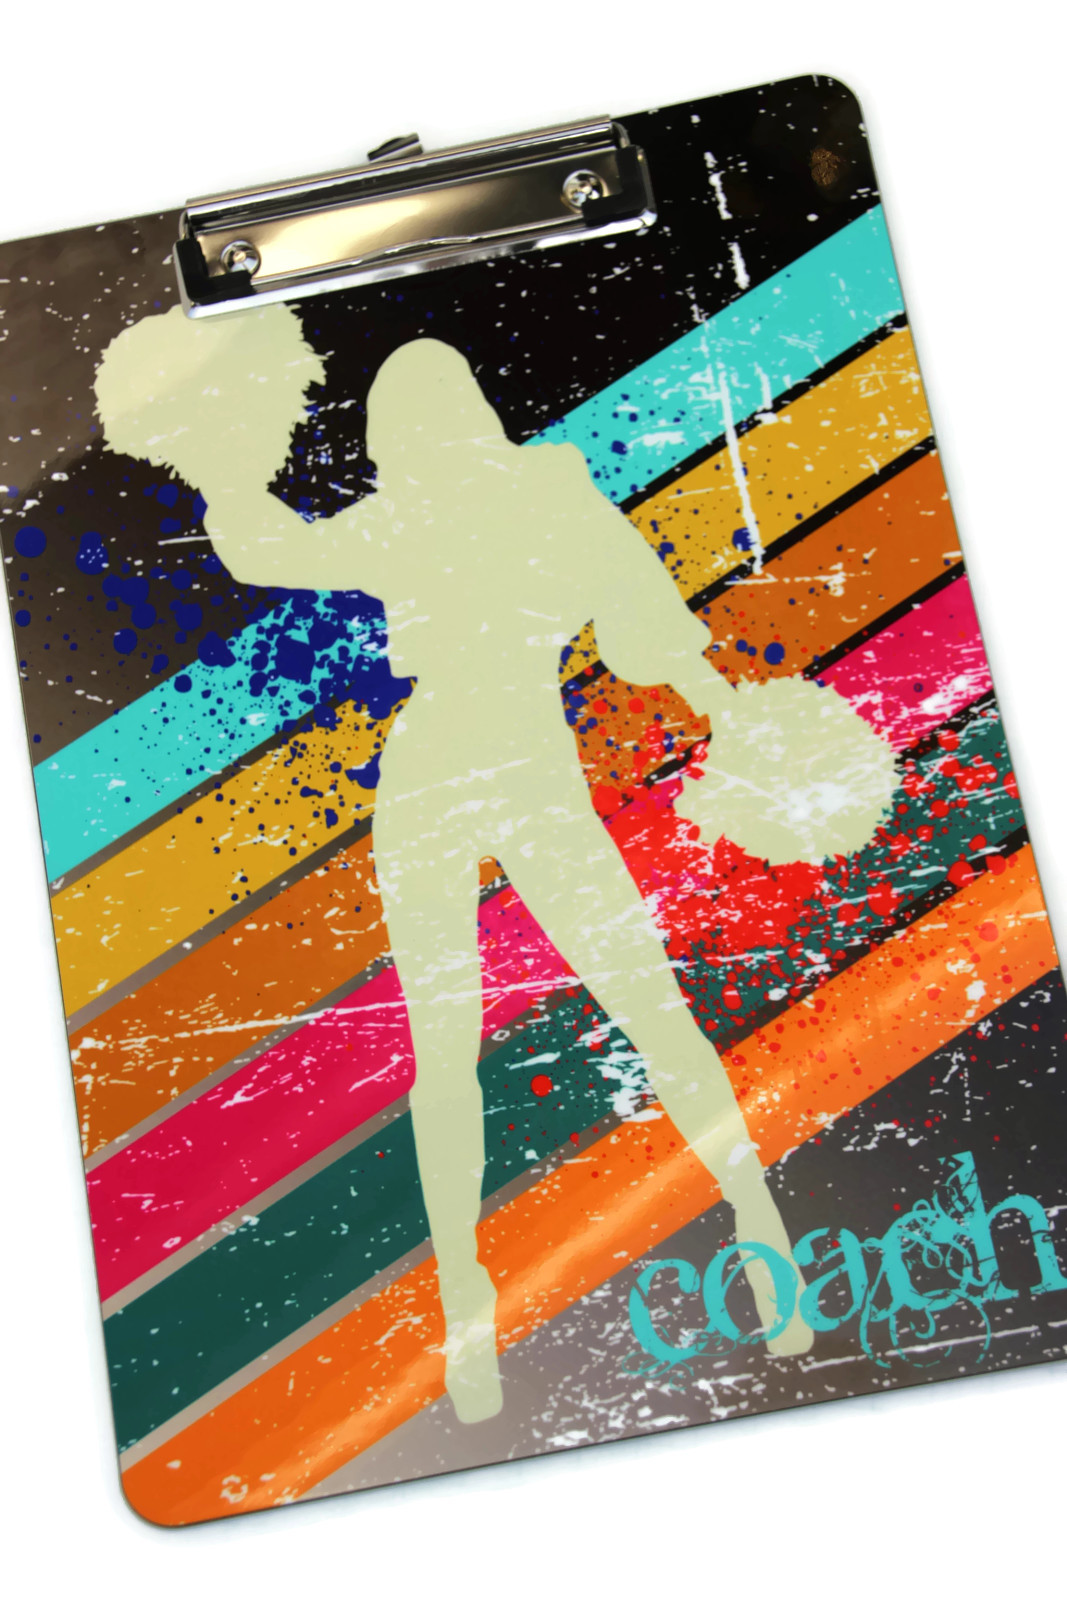 Cheer Coach made with sublimation printing